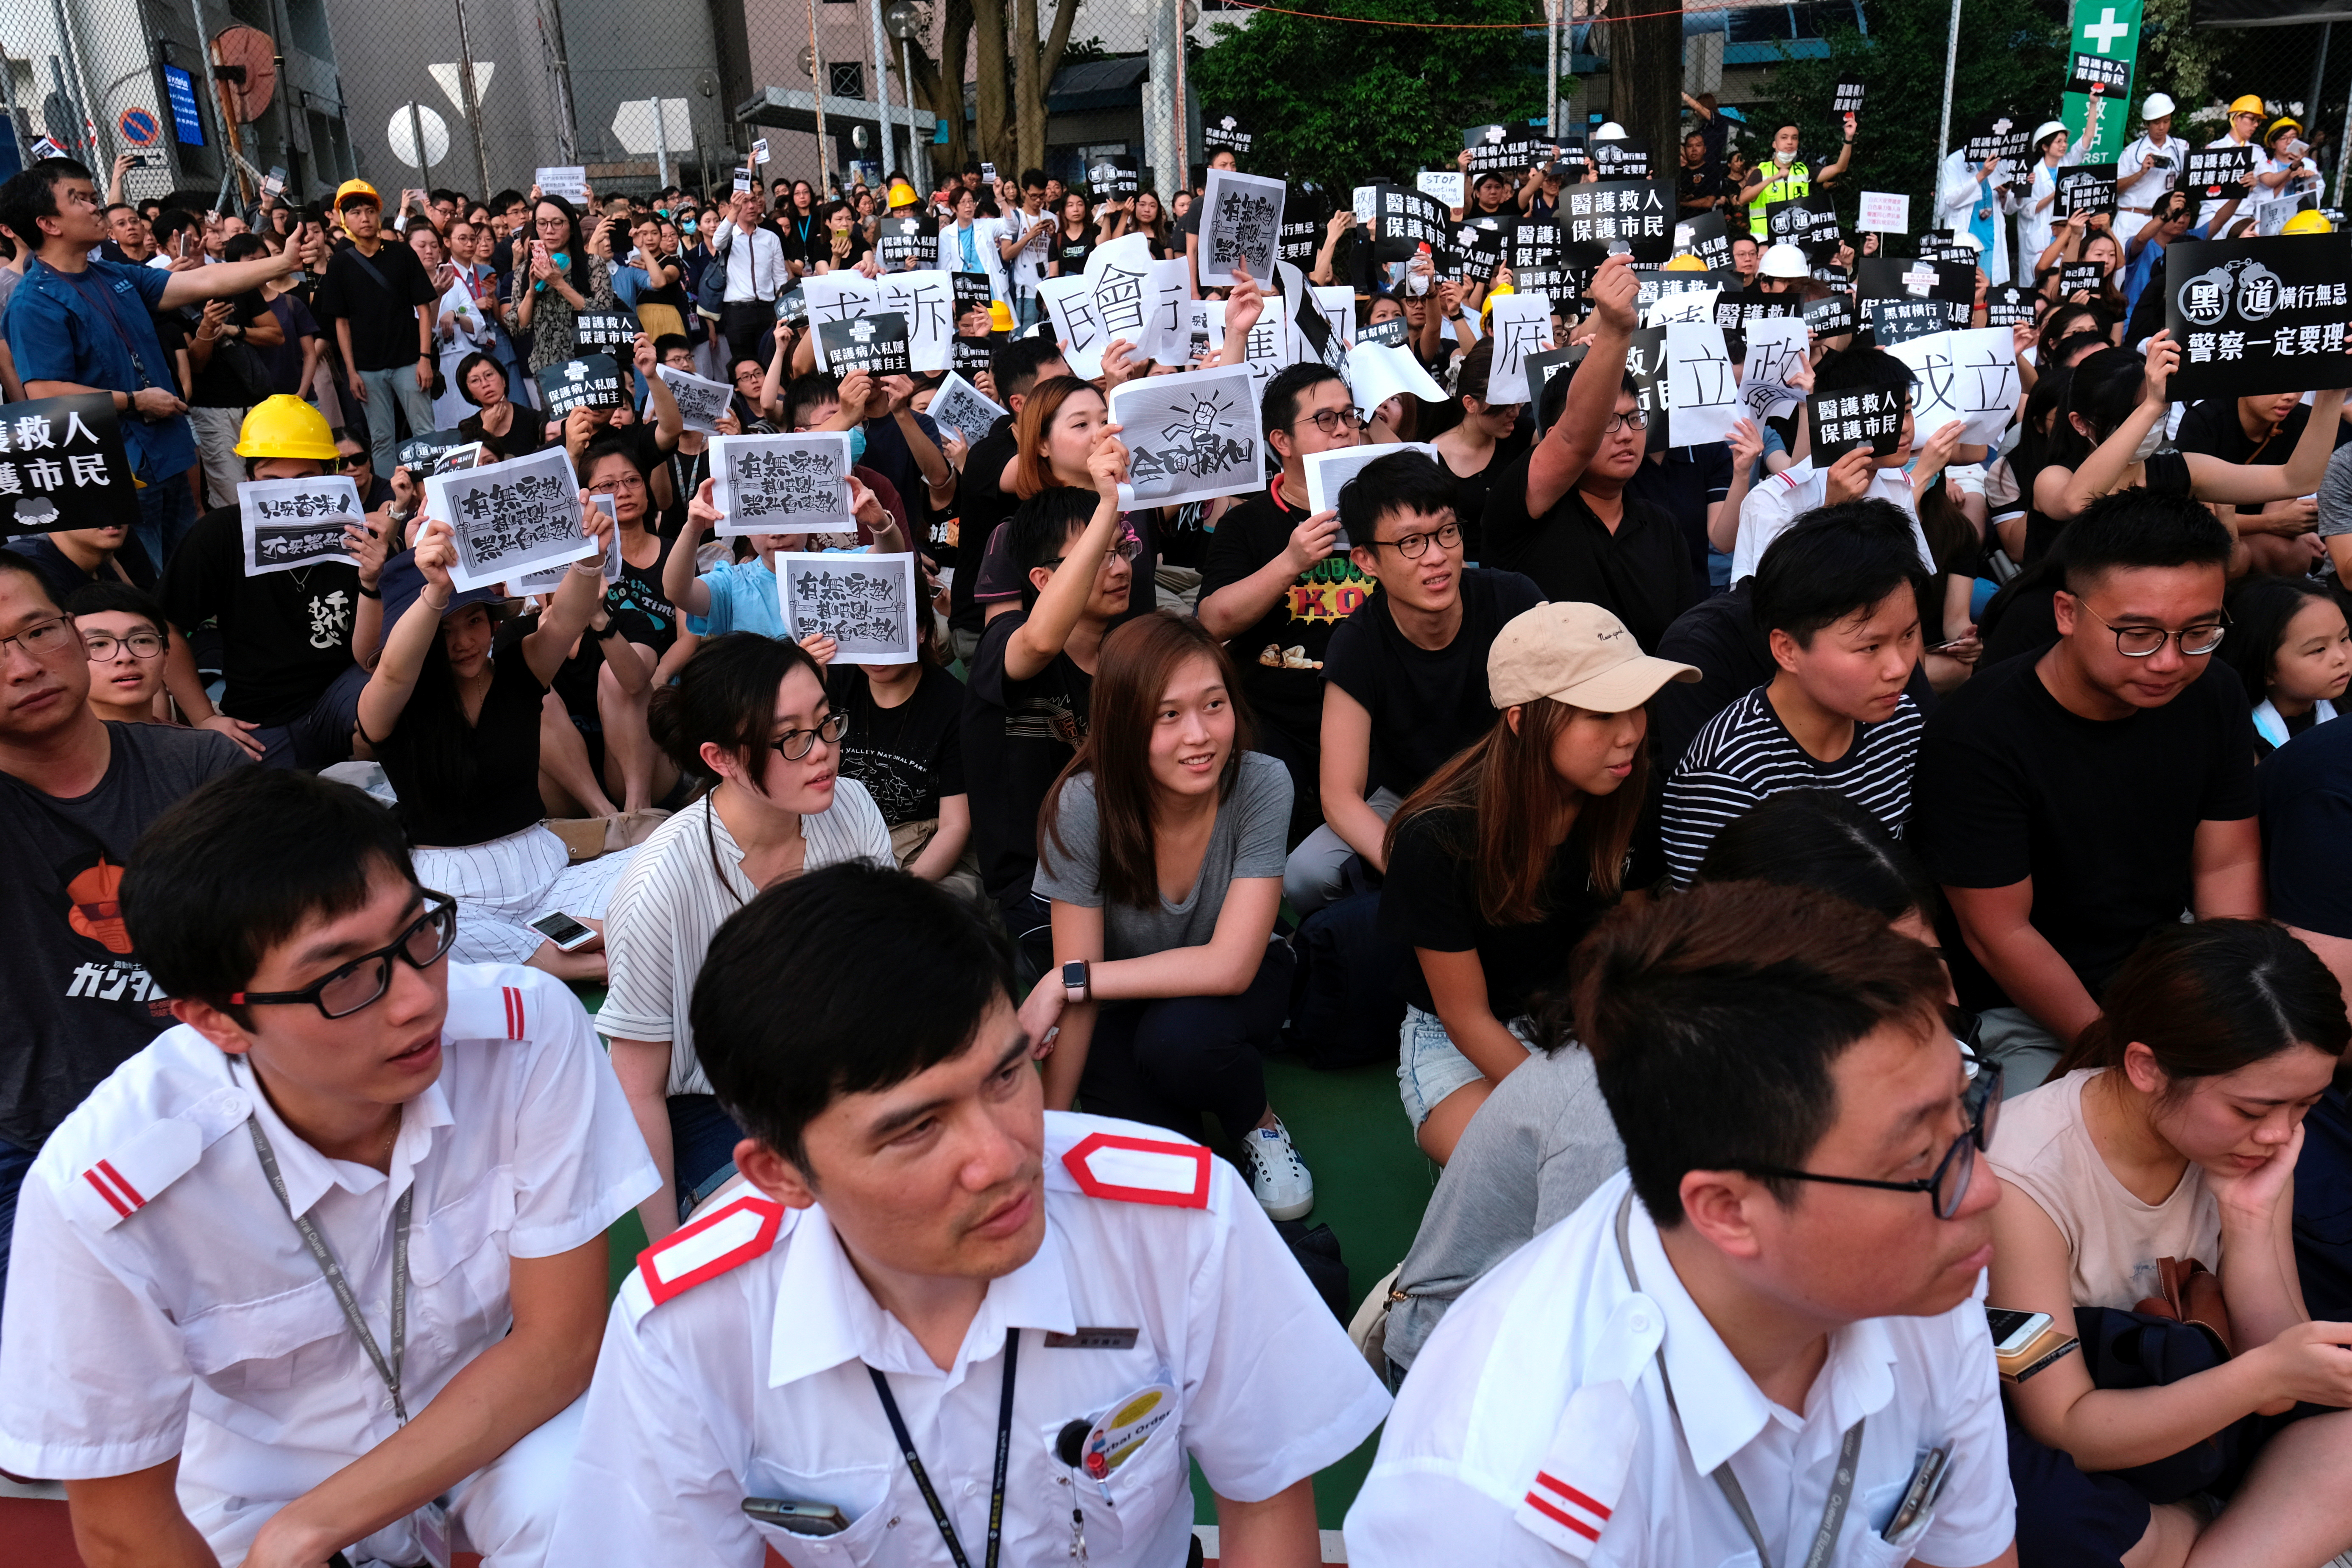 Public hospital doctors, nurses and employees attend a rally against Sunday’s Yuen Long violent attacks over extradition bill protesters and citizens, at Queen Elizabeth Hospital, in Hong Kong, China July 26, 2019. REUTERS/Tyrone Siu/File Photo